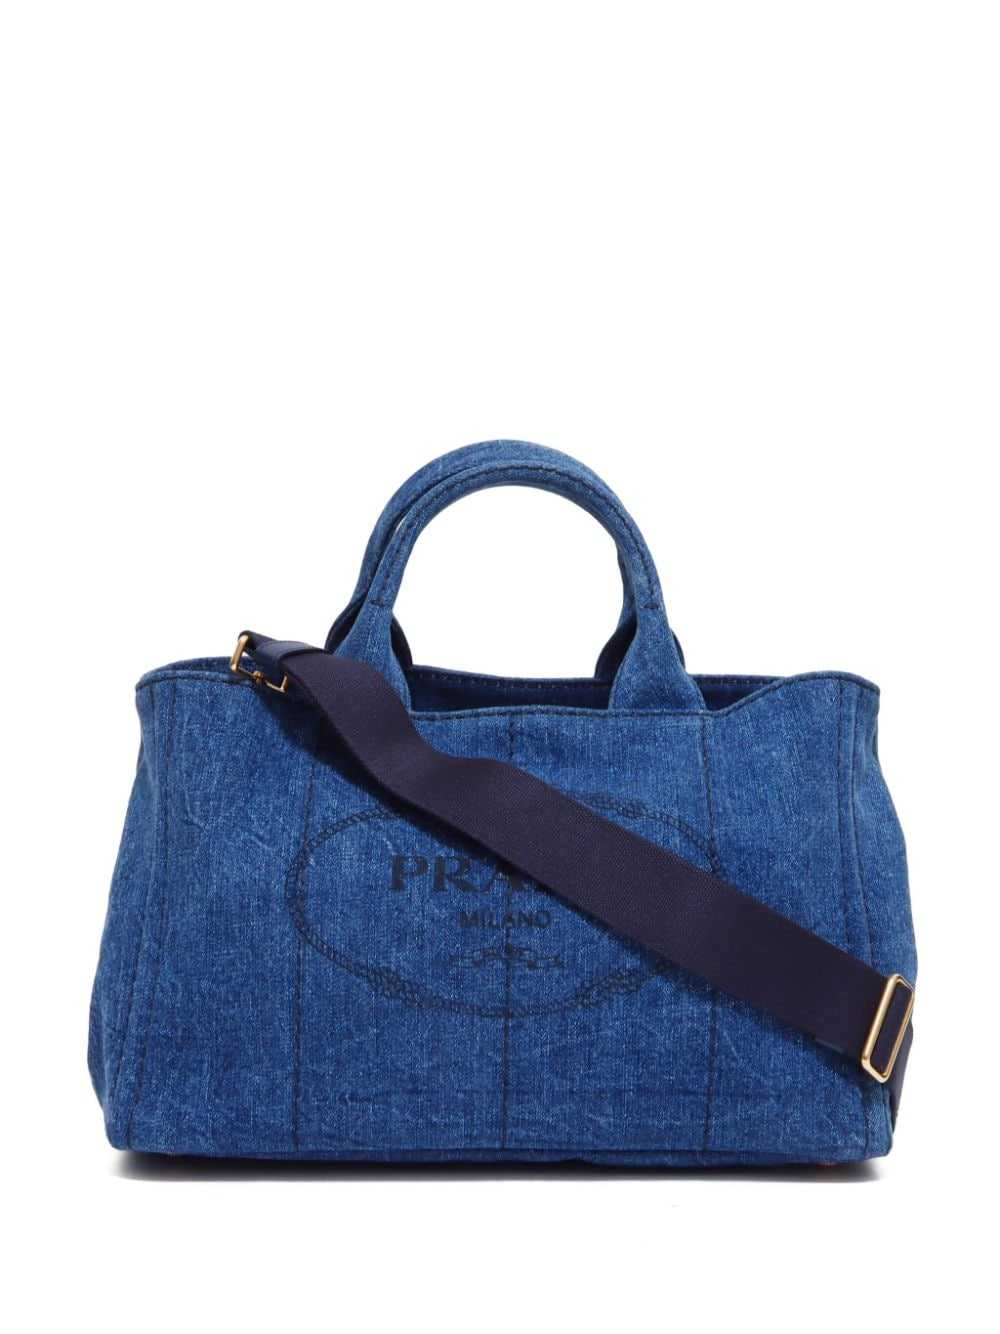 Prada Pre-Owned 2000s Canapa two-way bag - Blue - image 1